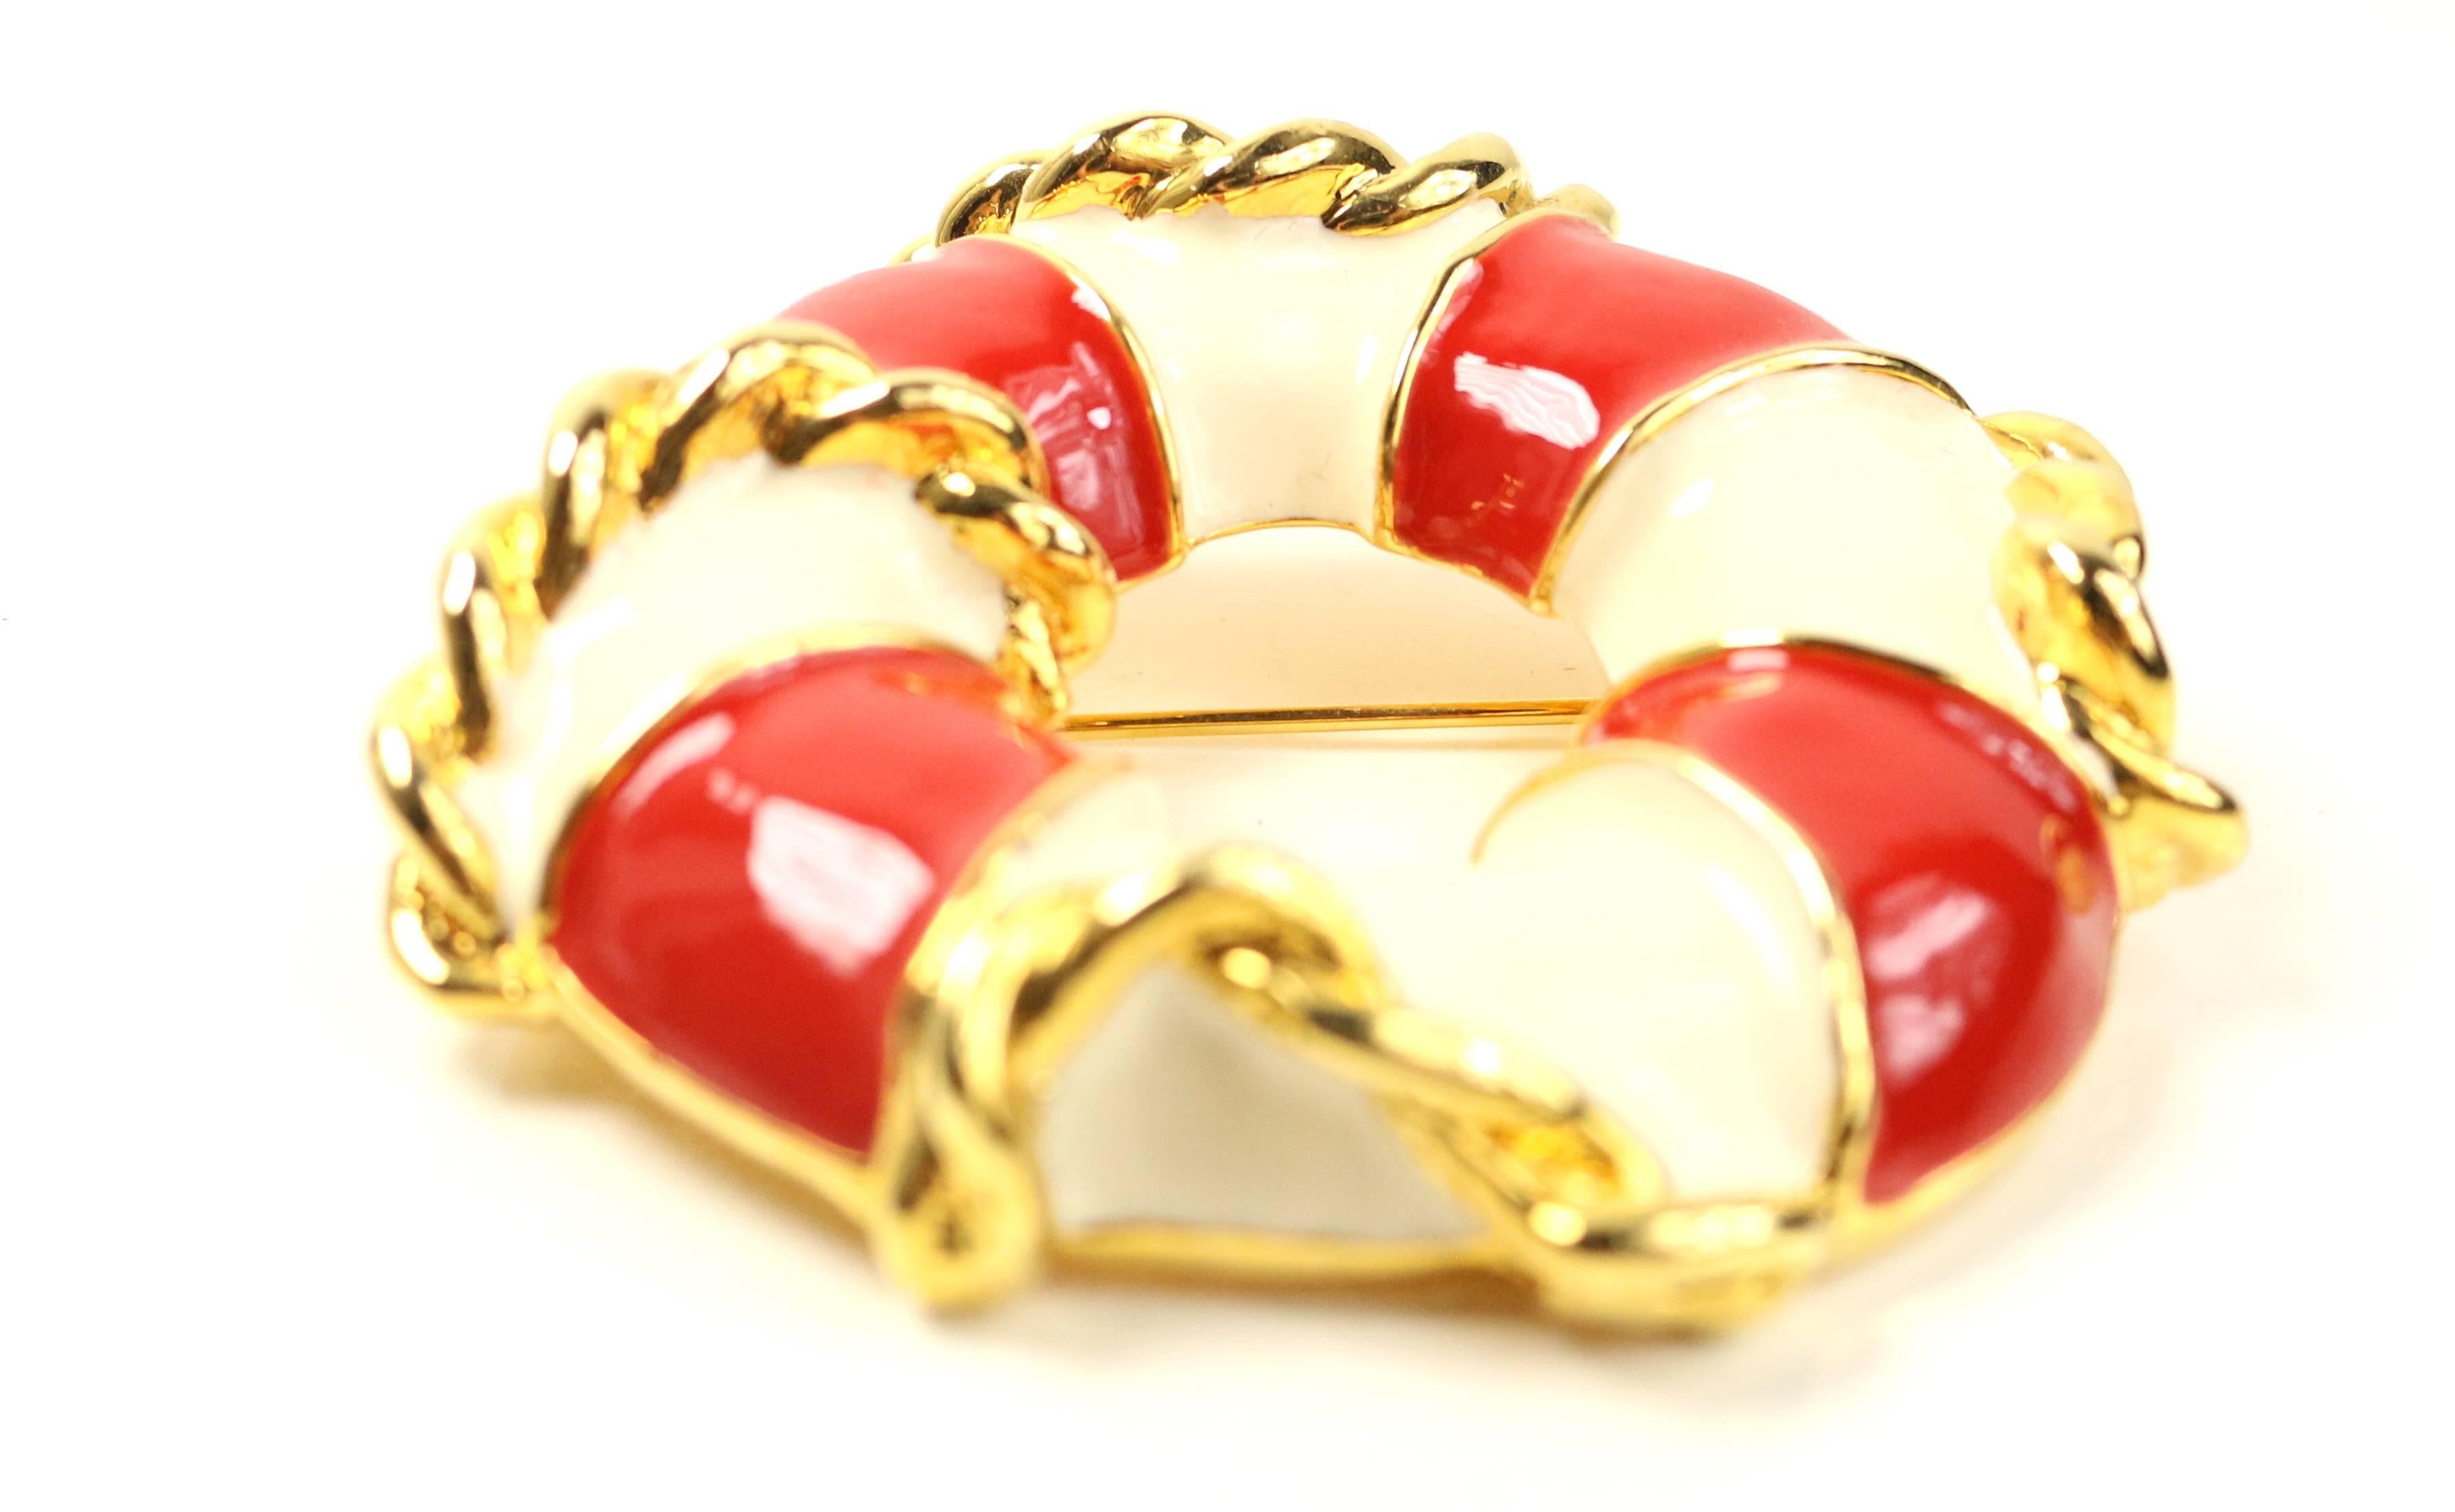 - Vintage 80s Escada round lifebuoy like brooch. 

- Featuring ivory and red with gold toned rope like accent. 

- Diameter: 2.5 inches. 

